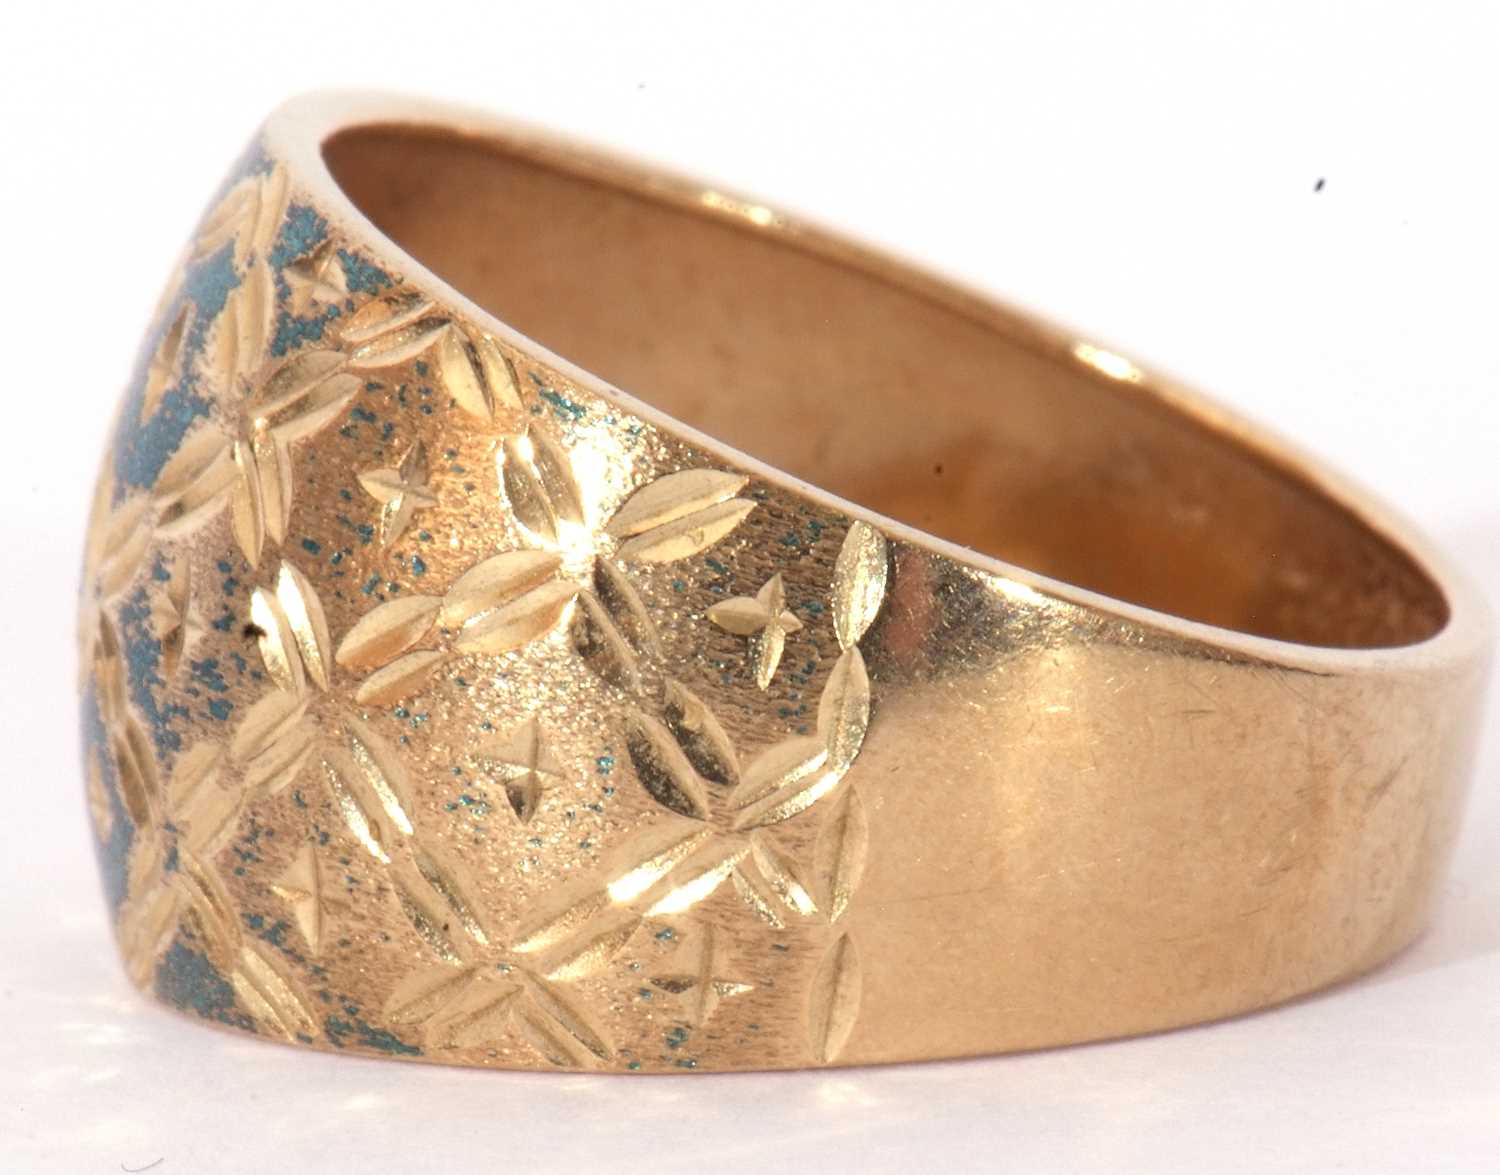 Modern 9ct gold wide band ring engraved and burnished in a geometric design, size Q, 2.0gms - Image 3 of 8